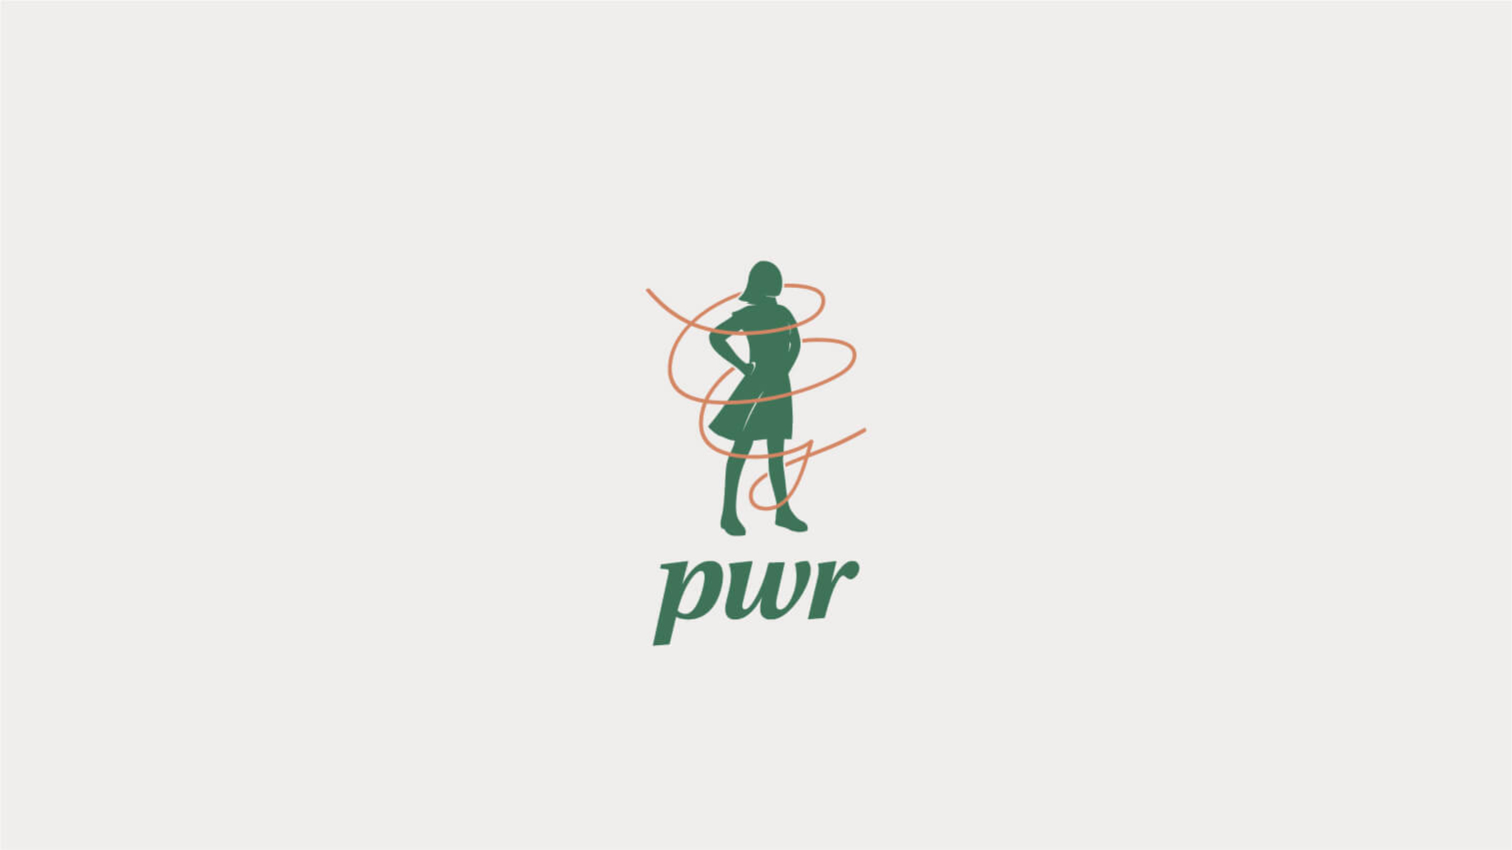 AboutYou_Case History_PWR_Branding_02c